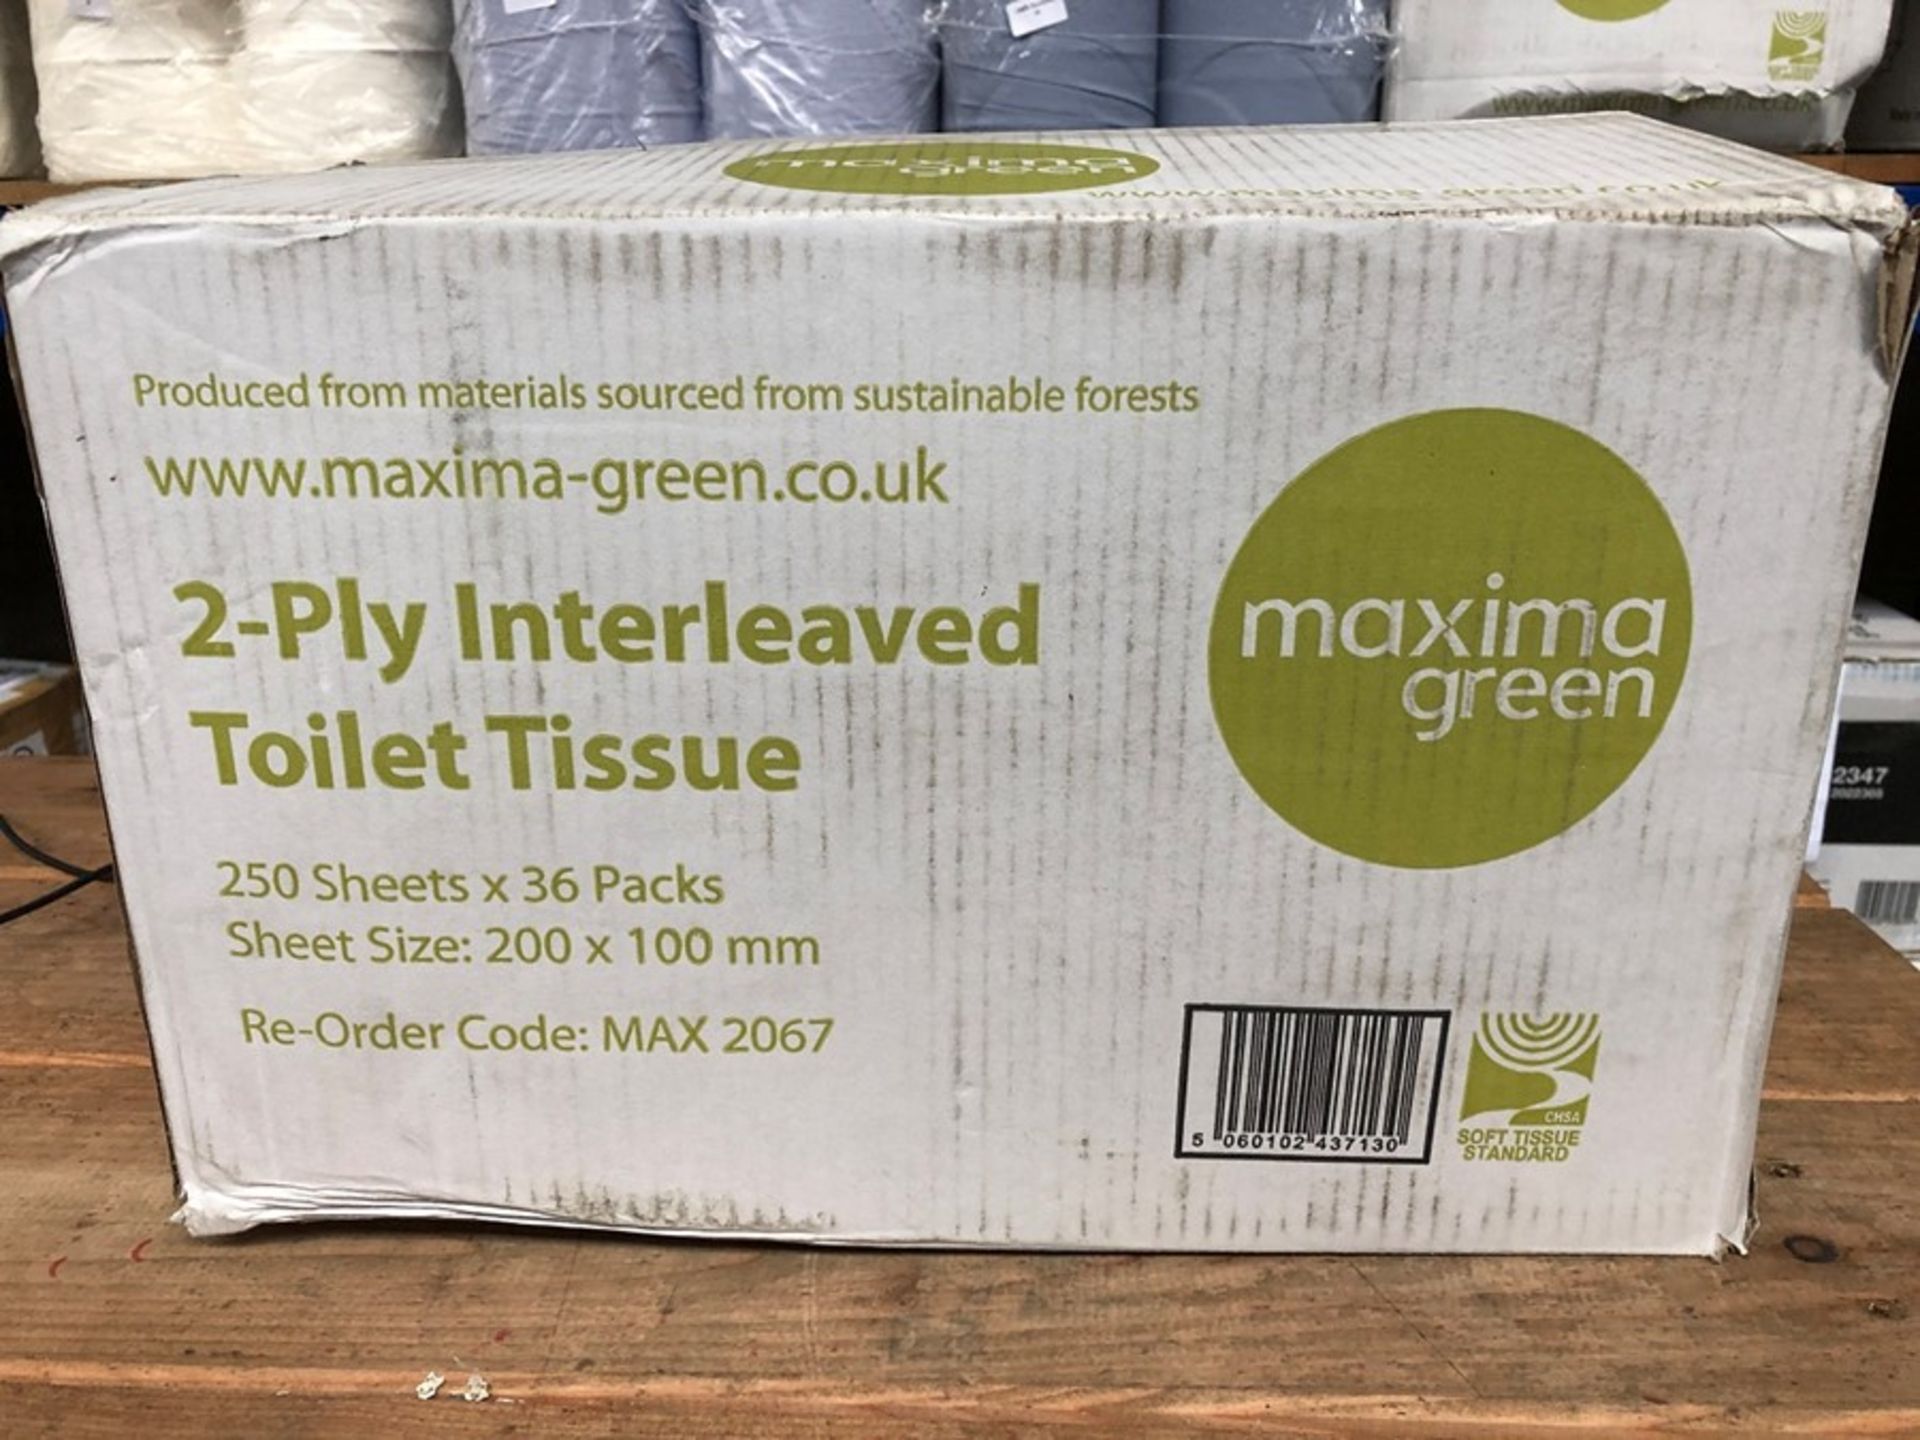 1 LOT TO CONTAIN MAXIMA GREEN 2 PLY INTERLEAVED TISSUE ROLLS 250 SHEETS X 36 ROLLS